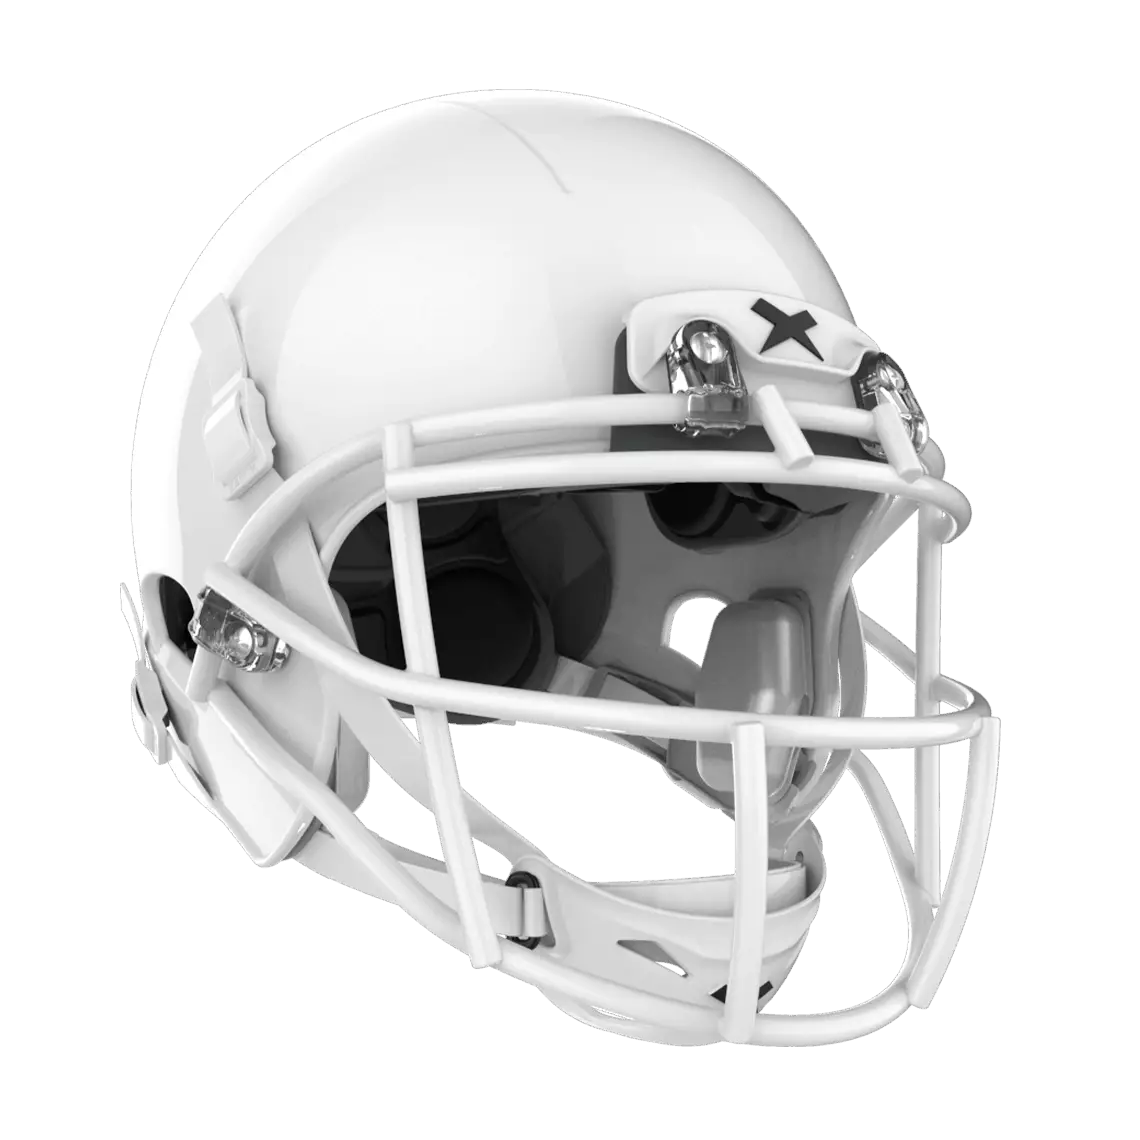 Right facing view x2e+ white shell, white facemask.